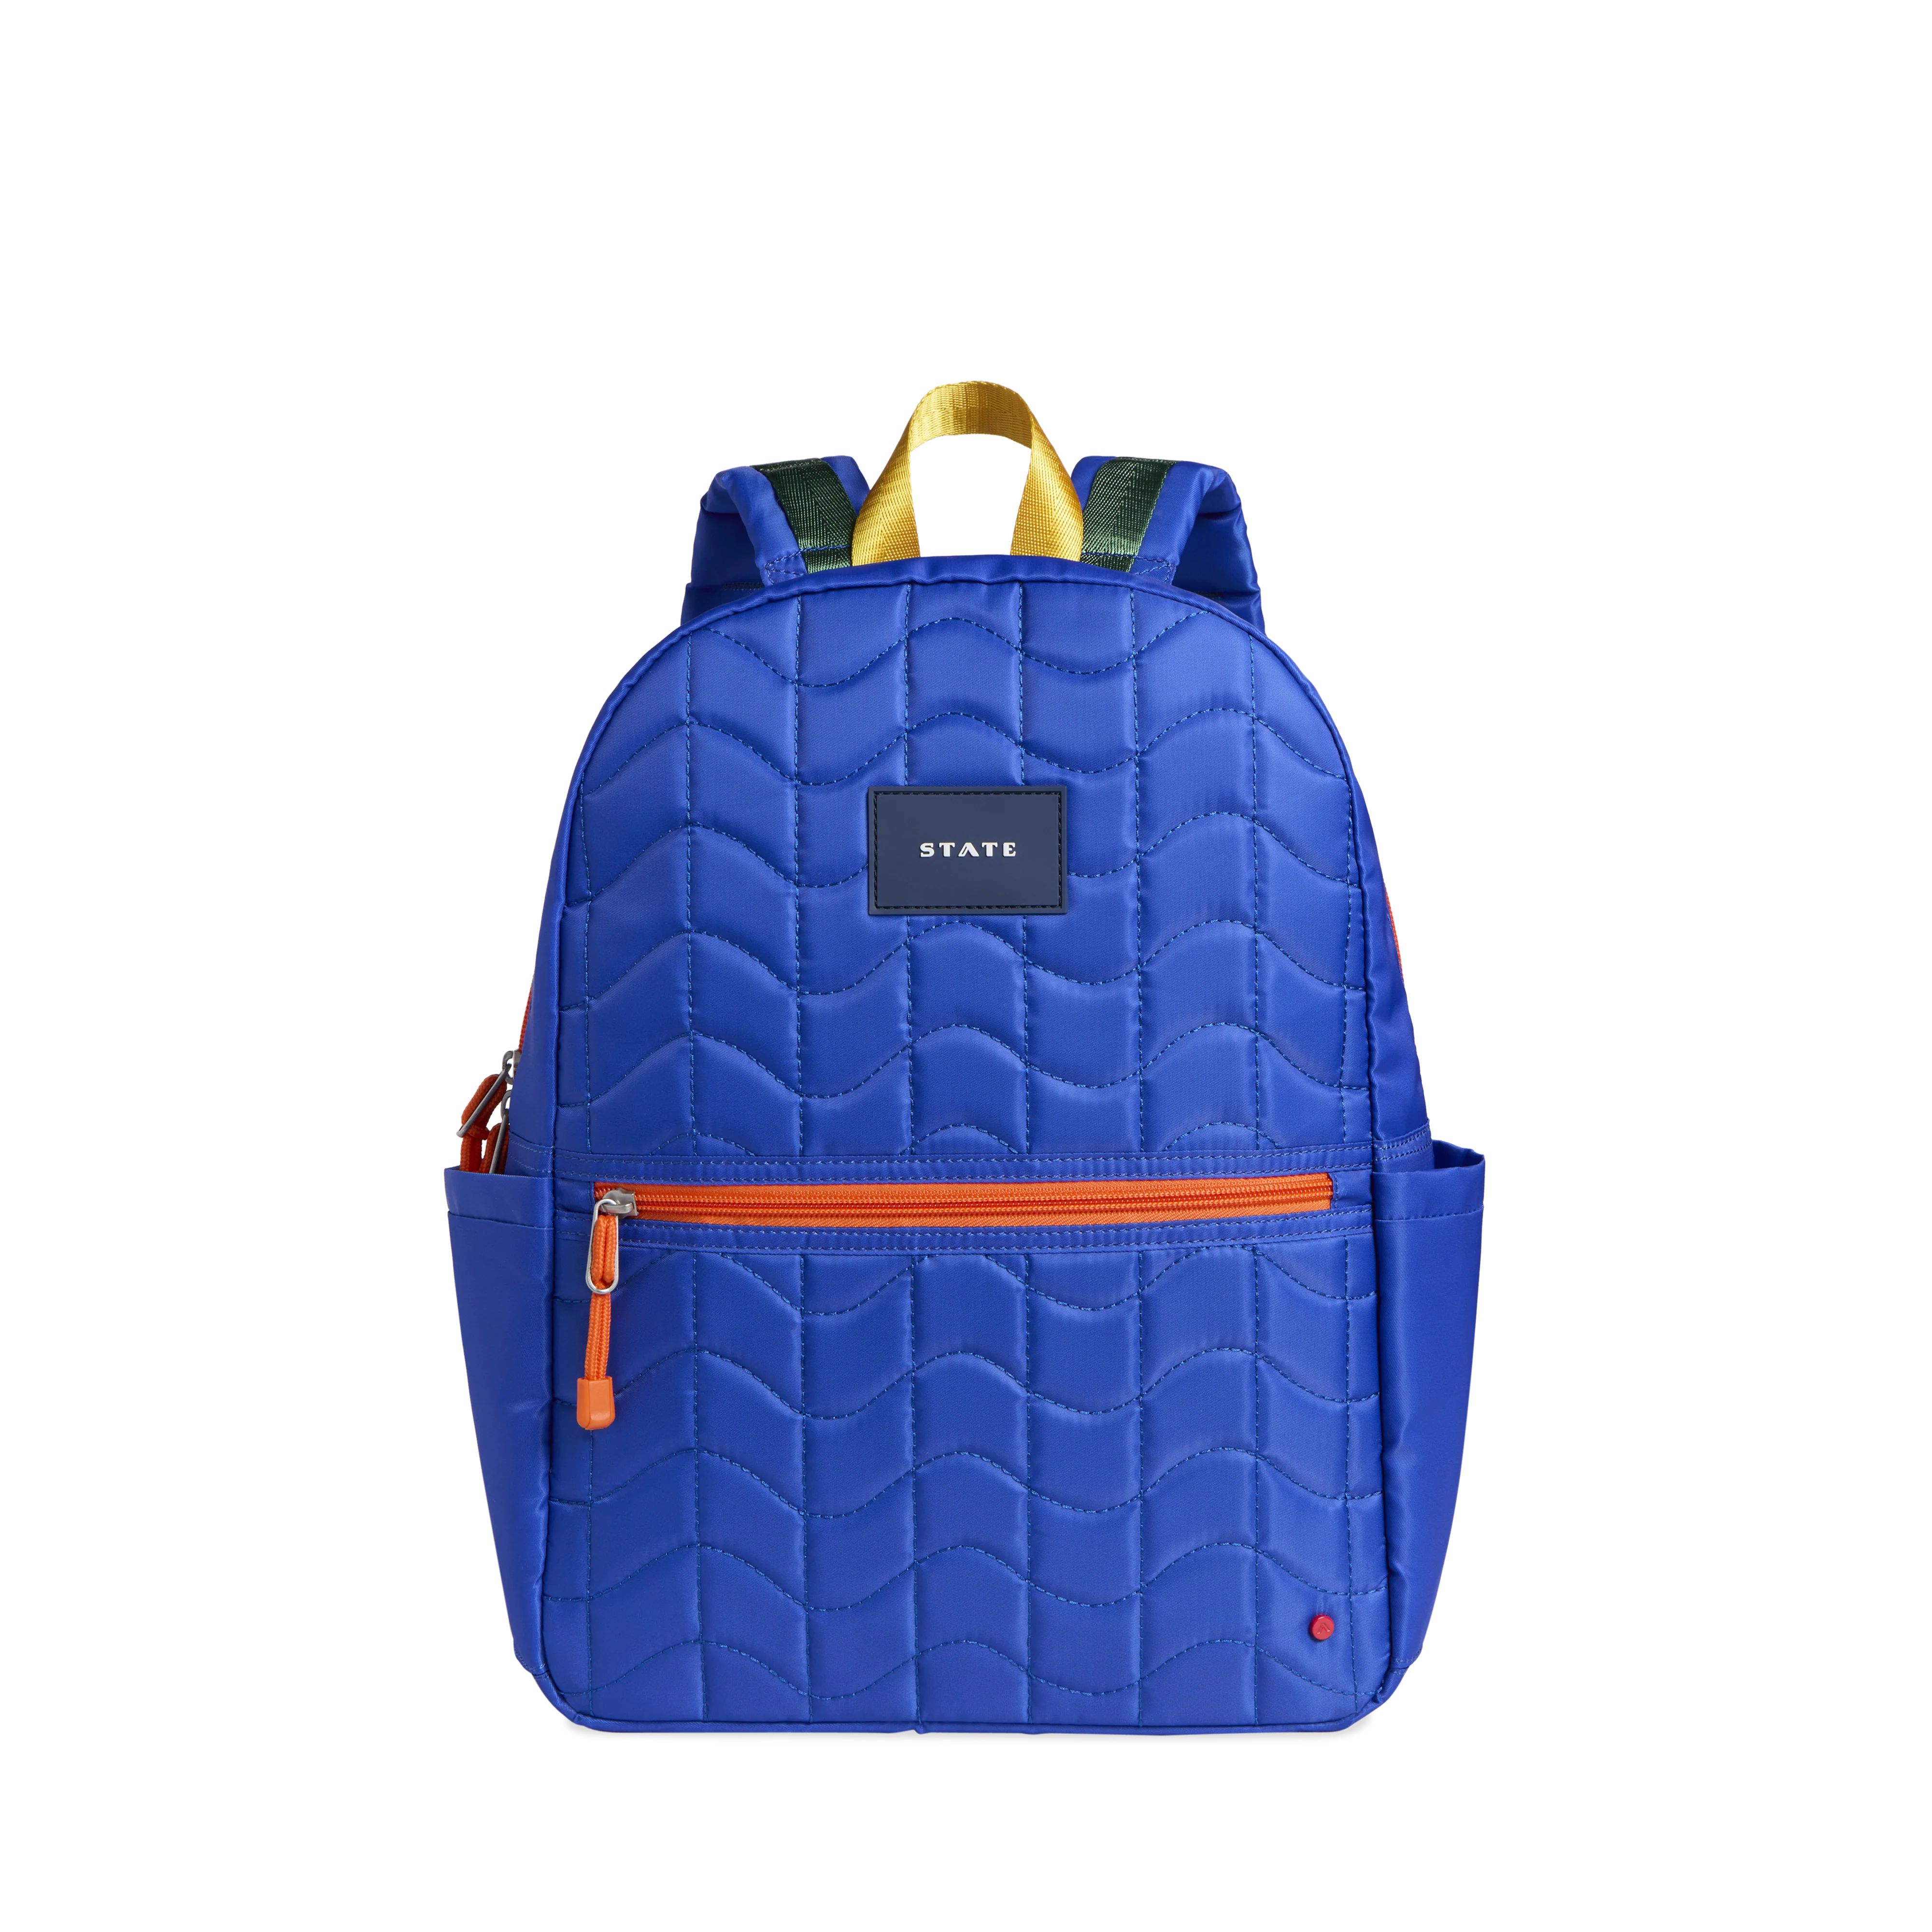 Kane Kids Travel Backpack Nylon Blue Wiggly Puffer | STATE Bags